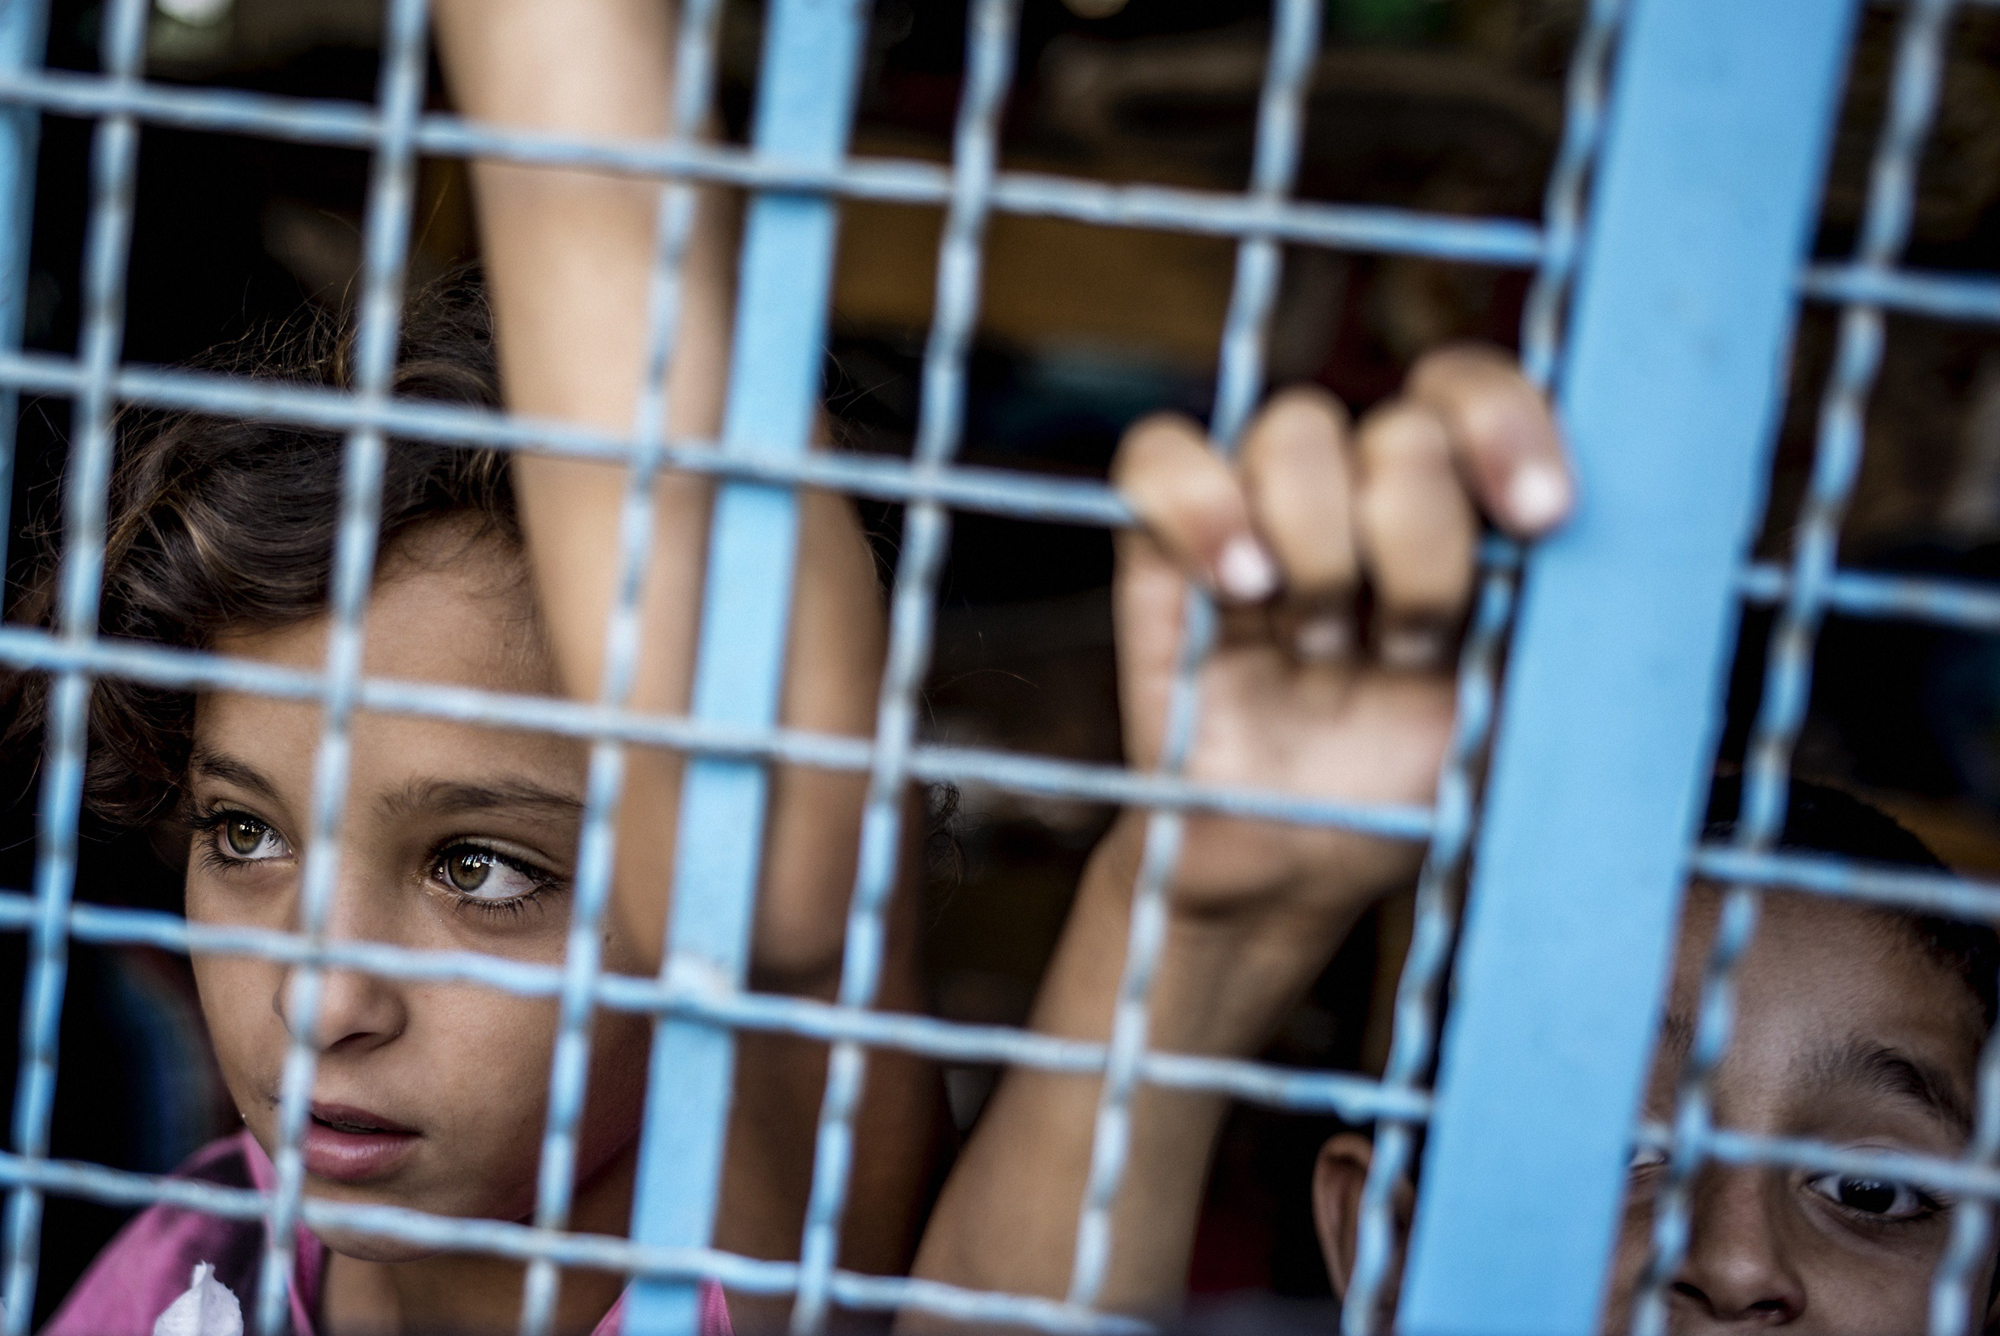 Palestinian girls peers from inside a UN school in Jabalia, north Gaza Strip, on July 25, 2014, where they found shelter after escaping from their home.